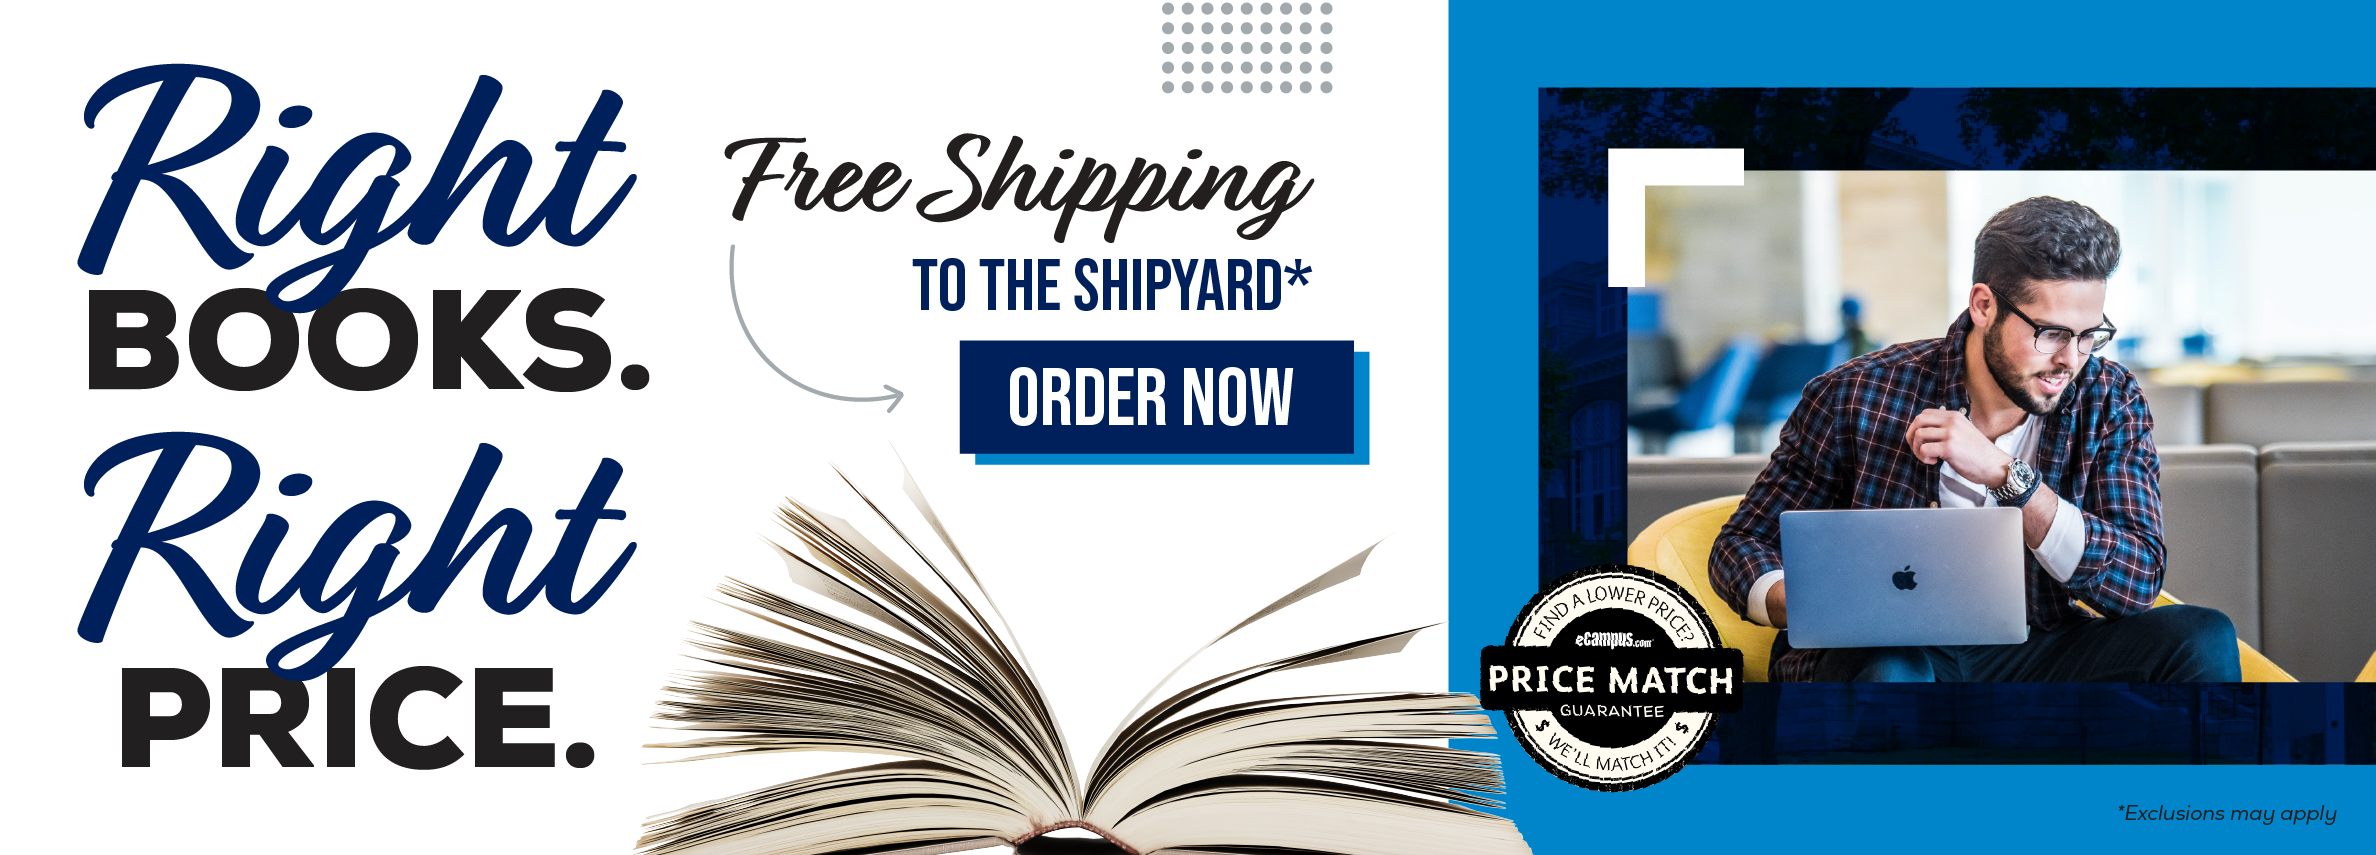 Right books. Right price. Free shipping to the Shipyard.* Order now. Price Match Guarantee. *Exclusions may apply.